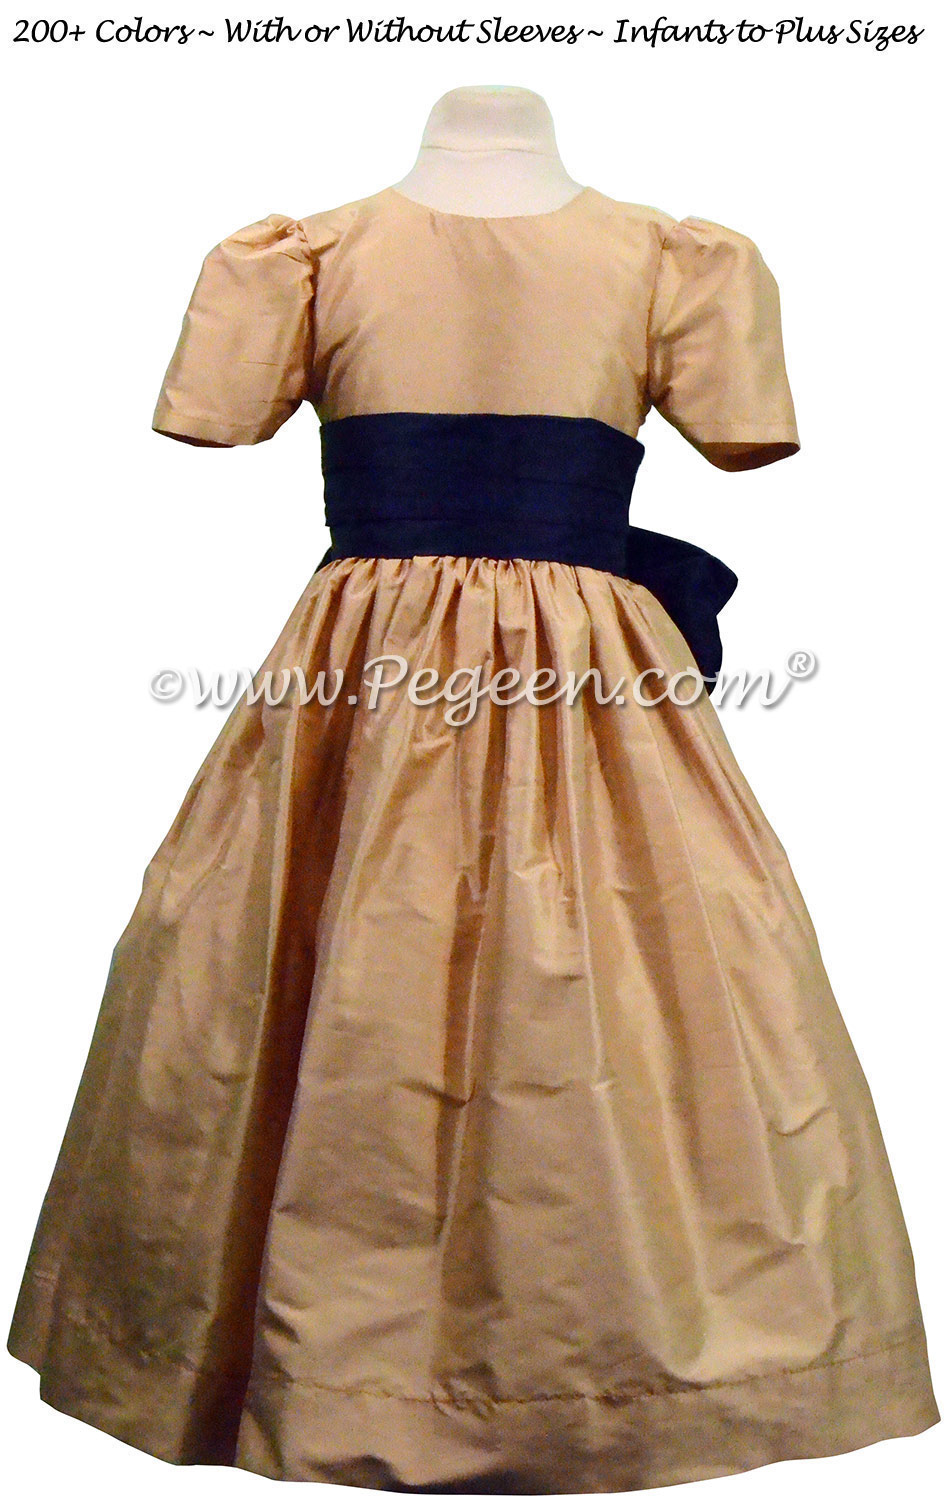 Navy and Spun Gold Flower Girl Dress Style 398 by Pegeen